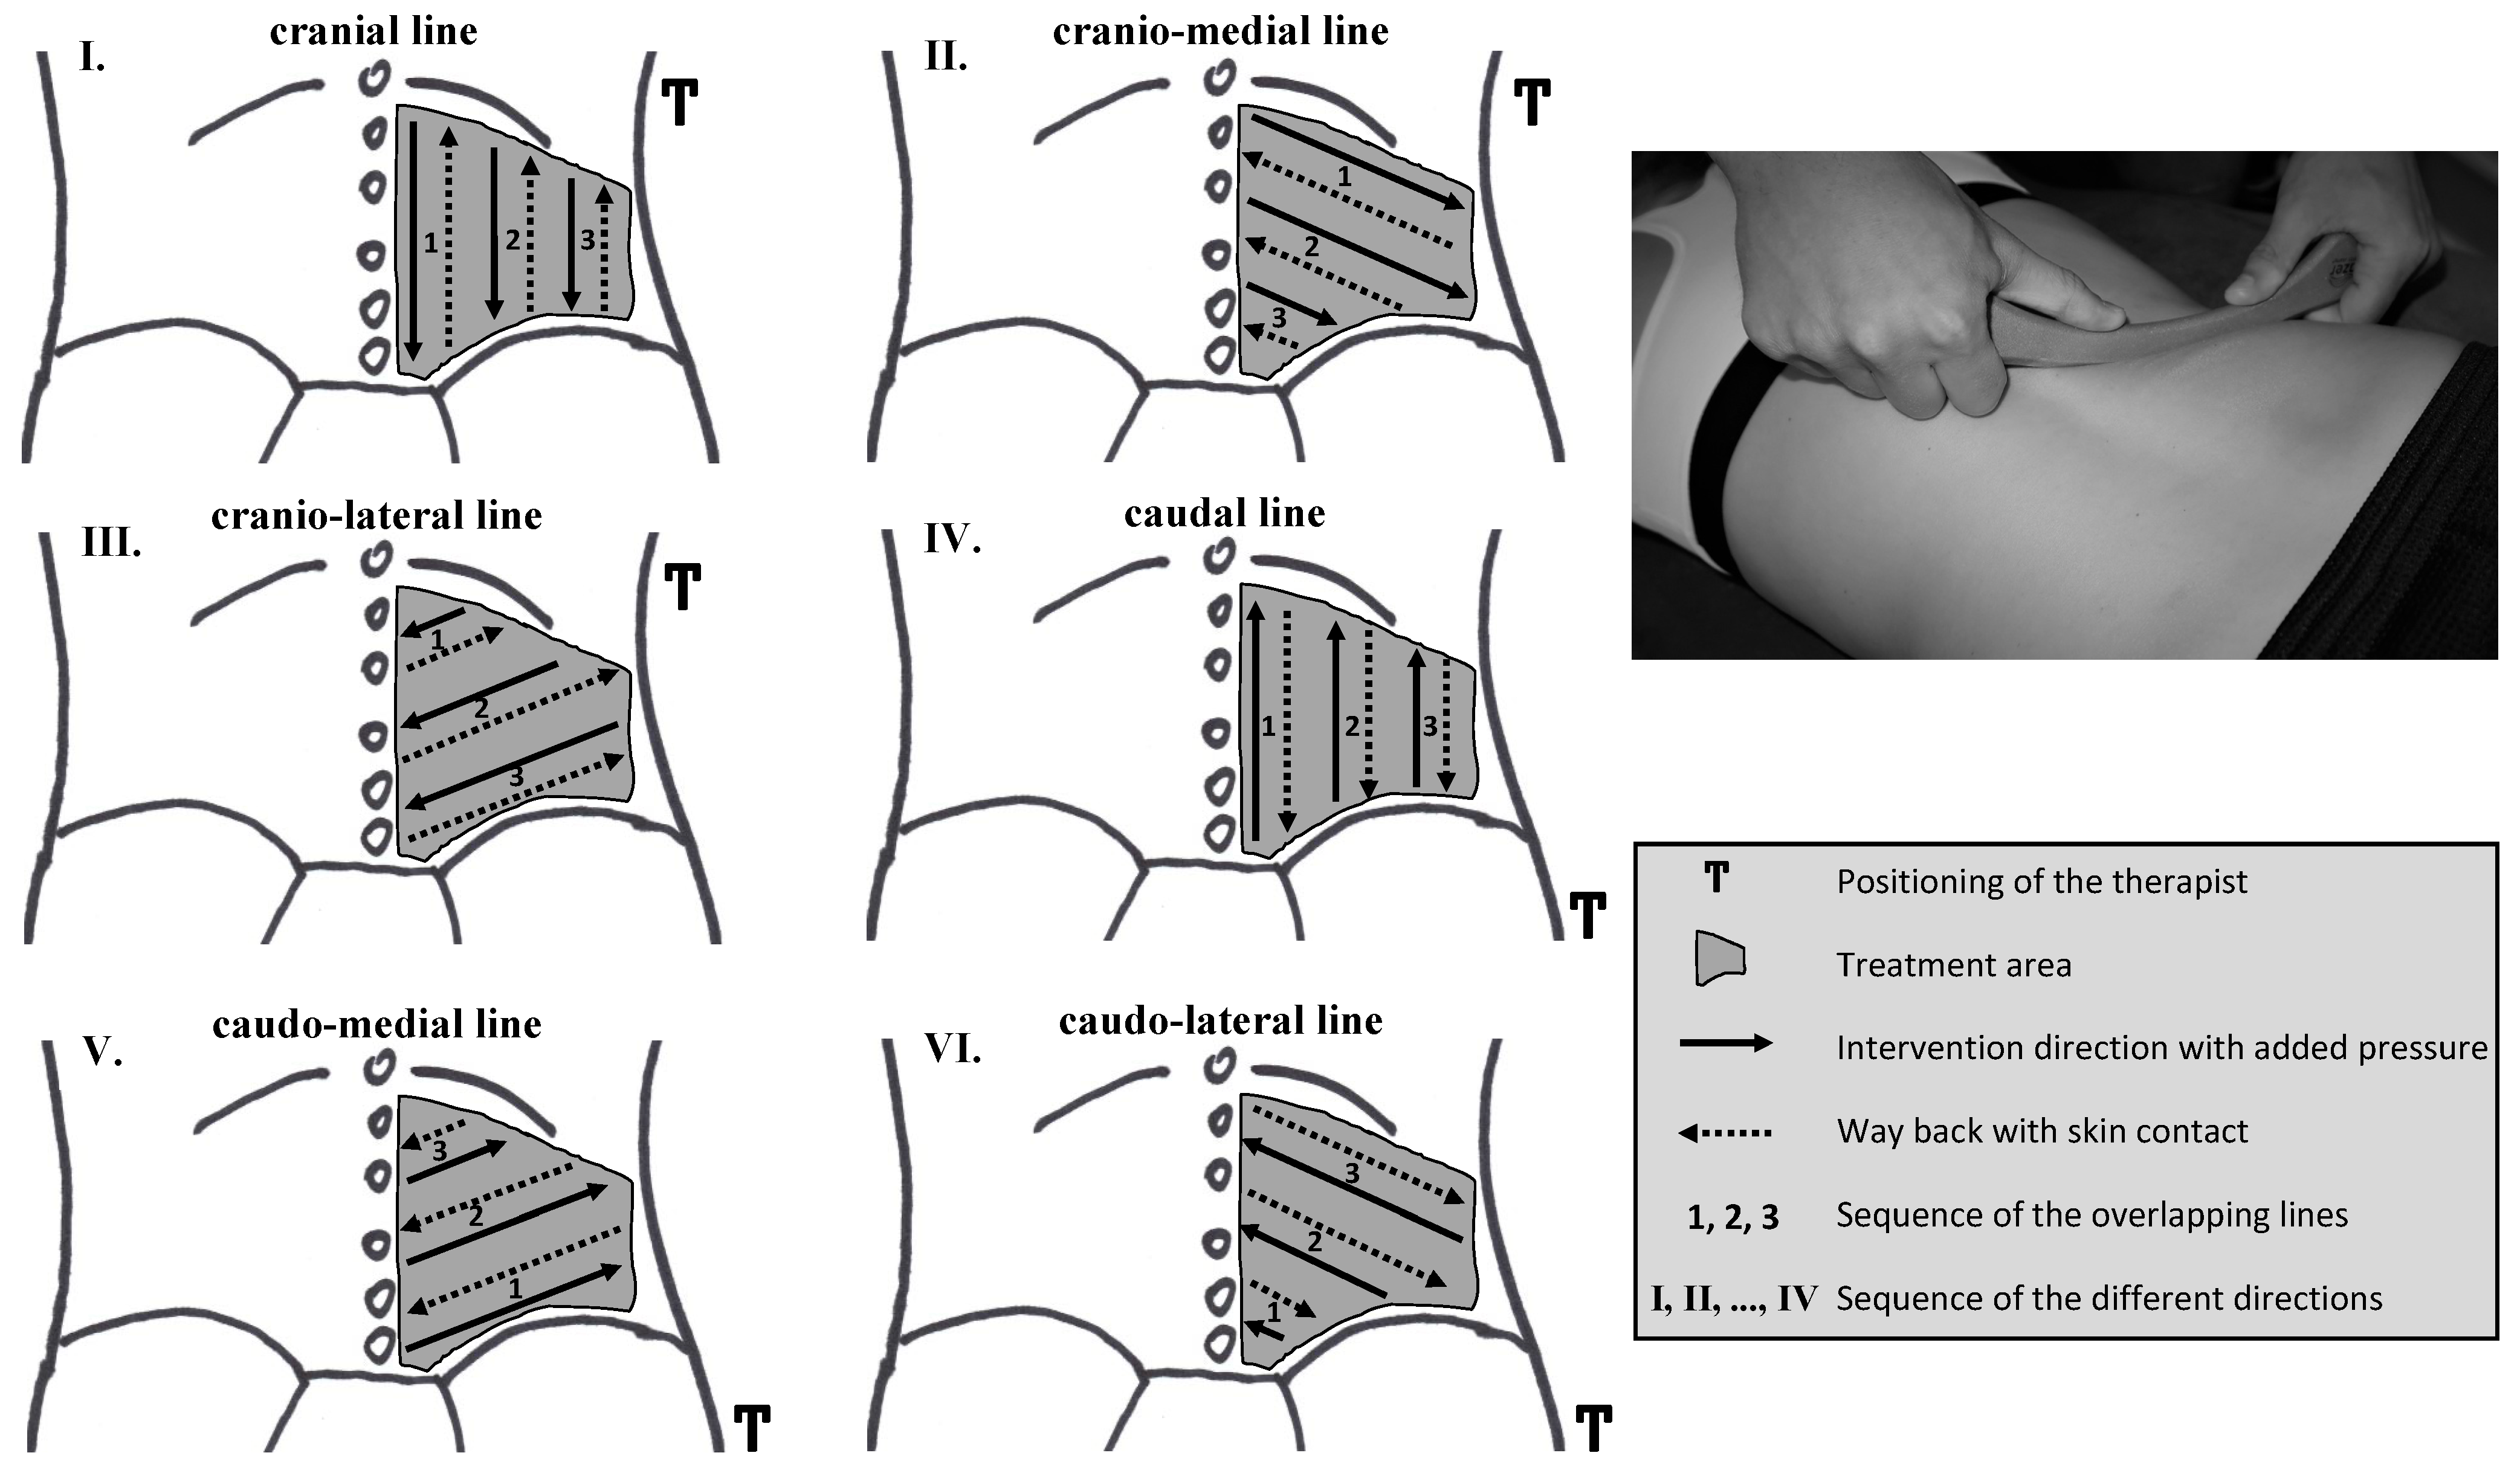 JCM | Free Full-Text | The Influence of a Single Instrument-Assisted Manual  Therapy (IAMT) for the Lower Back on the Structural and Functional  Properties of the Dorsal Myofascial Chain in Female Soccer